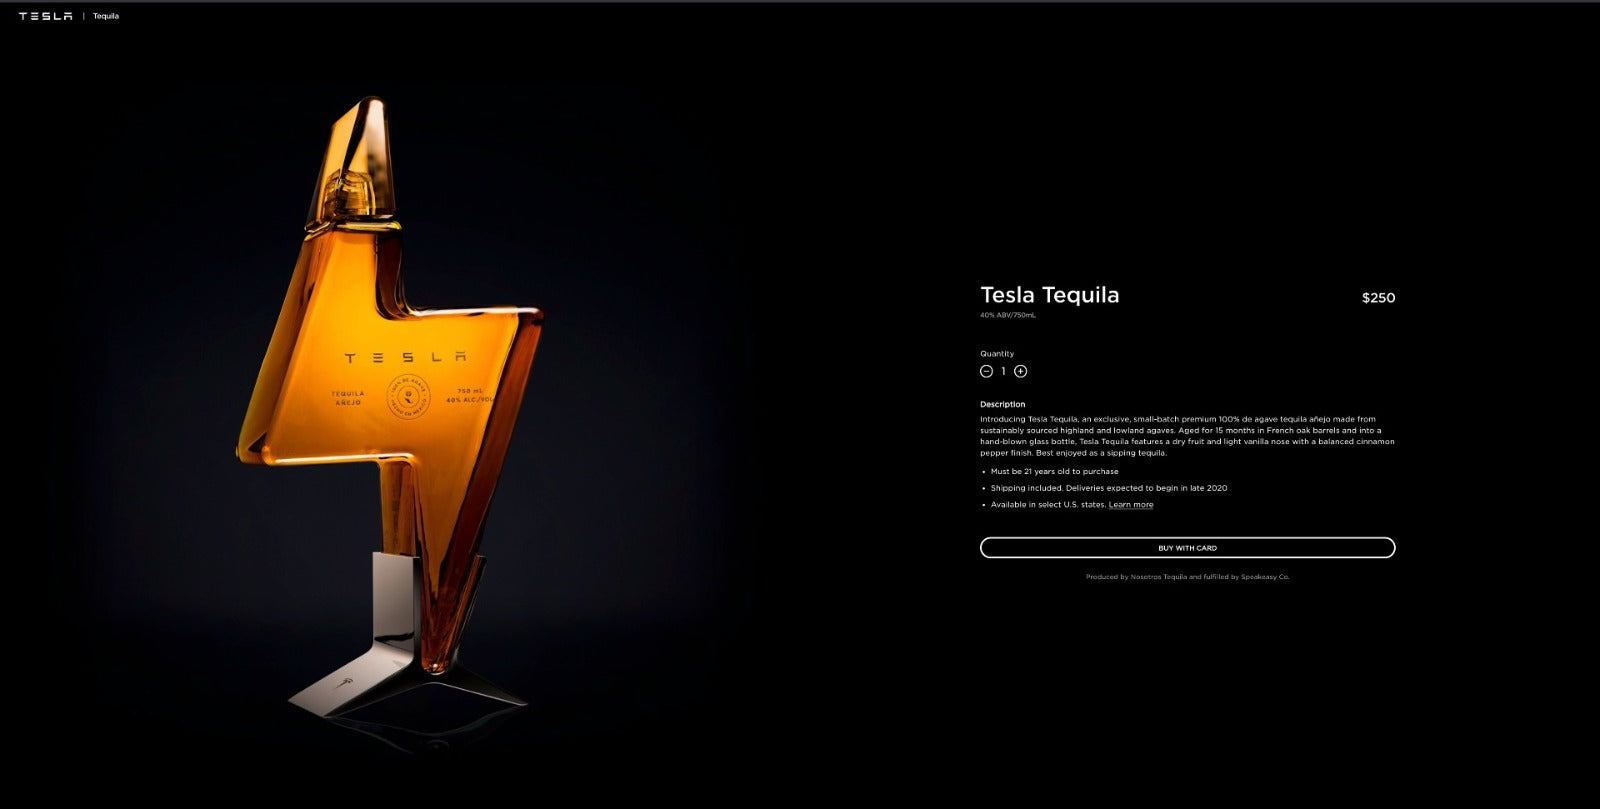 Tesla Launches Tequila For $250 Each, Limited 2 Per Person